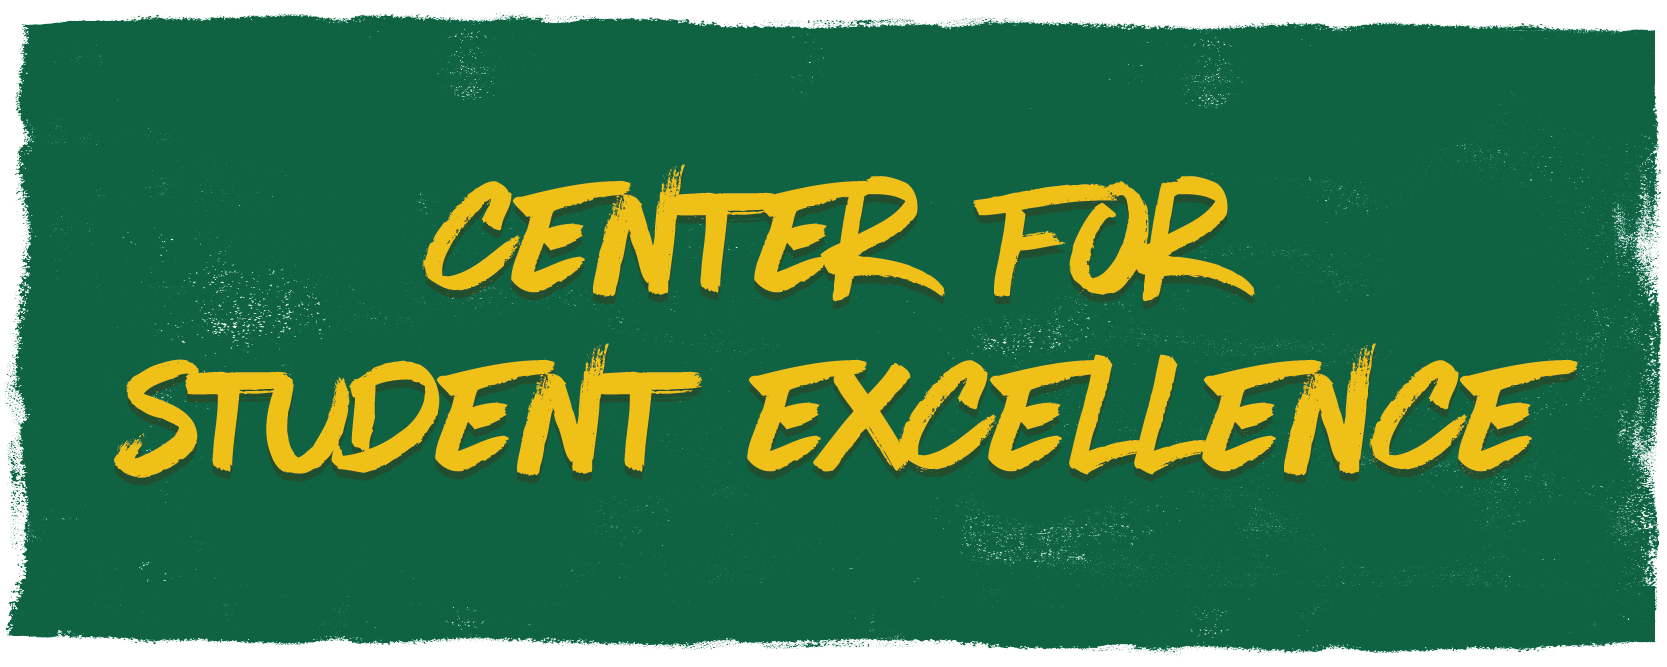 Center for Student Excellence